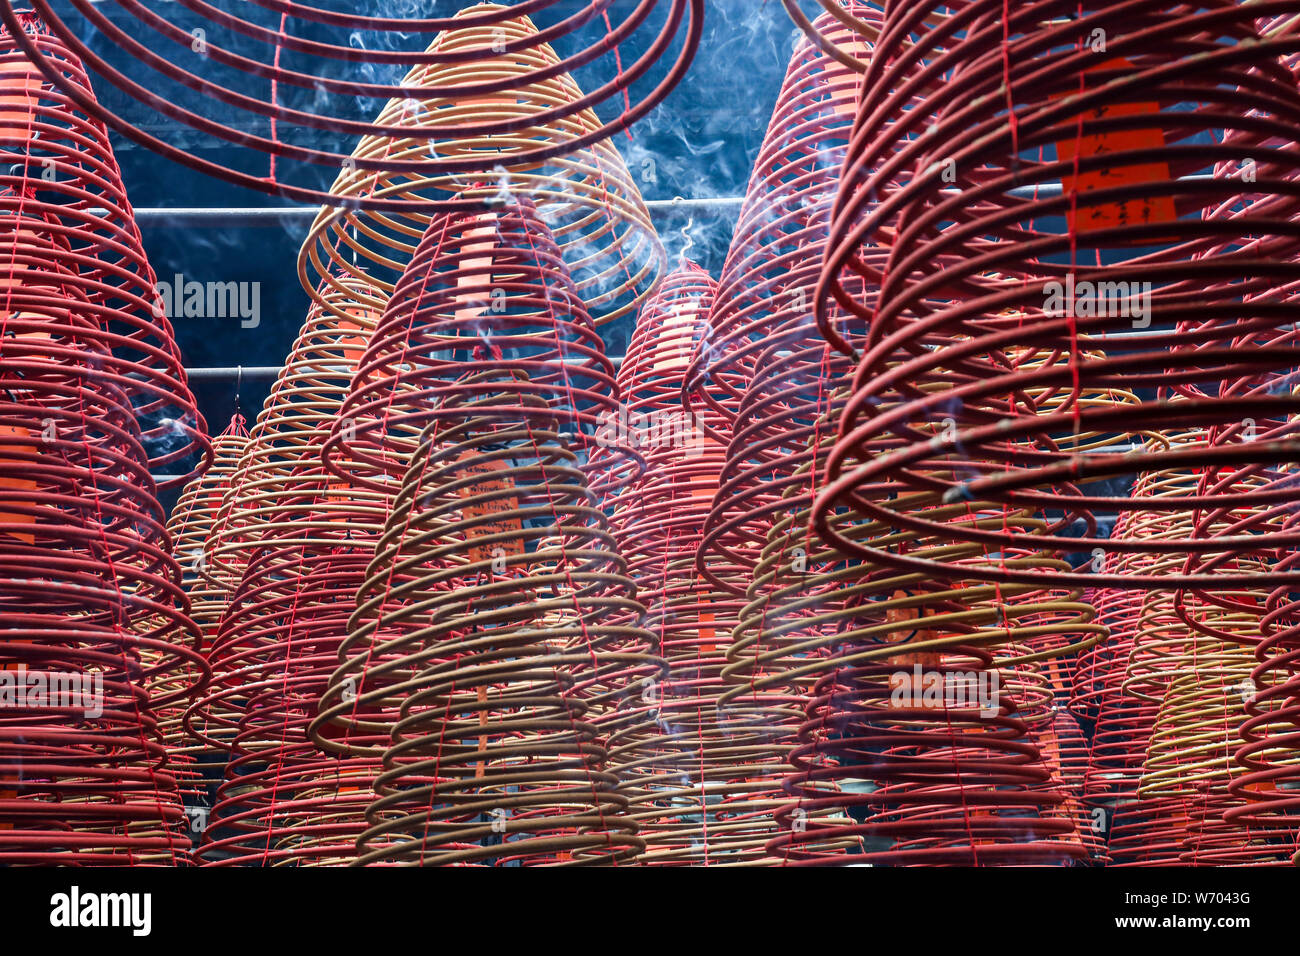 Suspended spiral incense sticks burning in Tin Hau Temple, Hong Kong Stock Photo